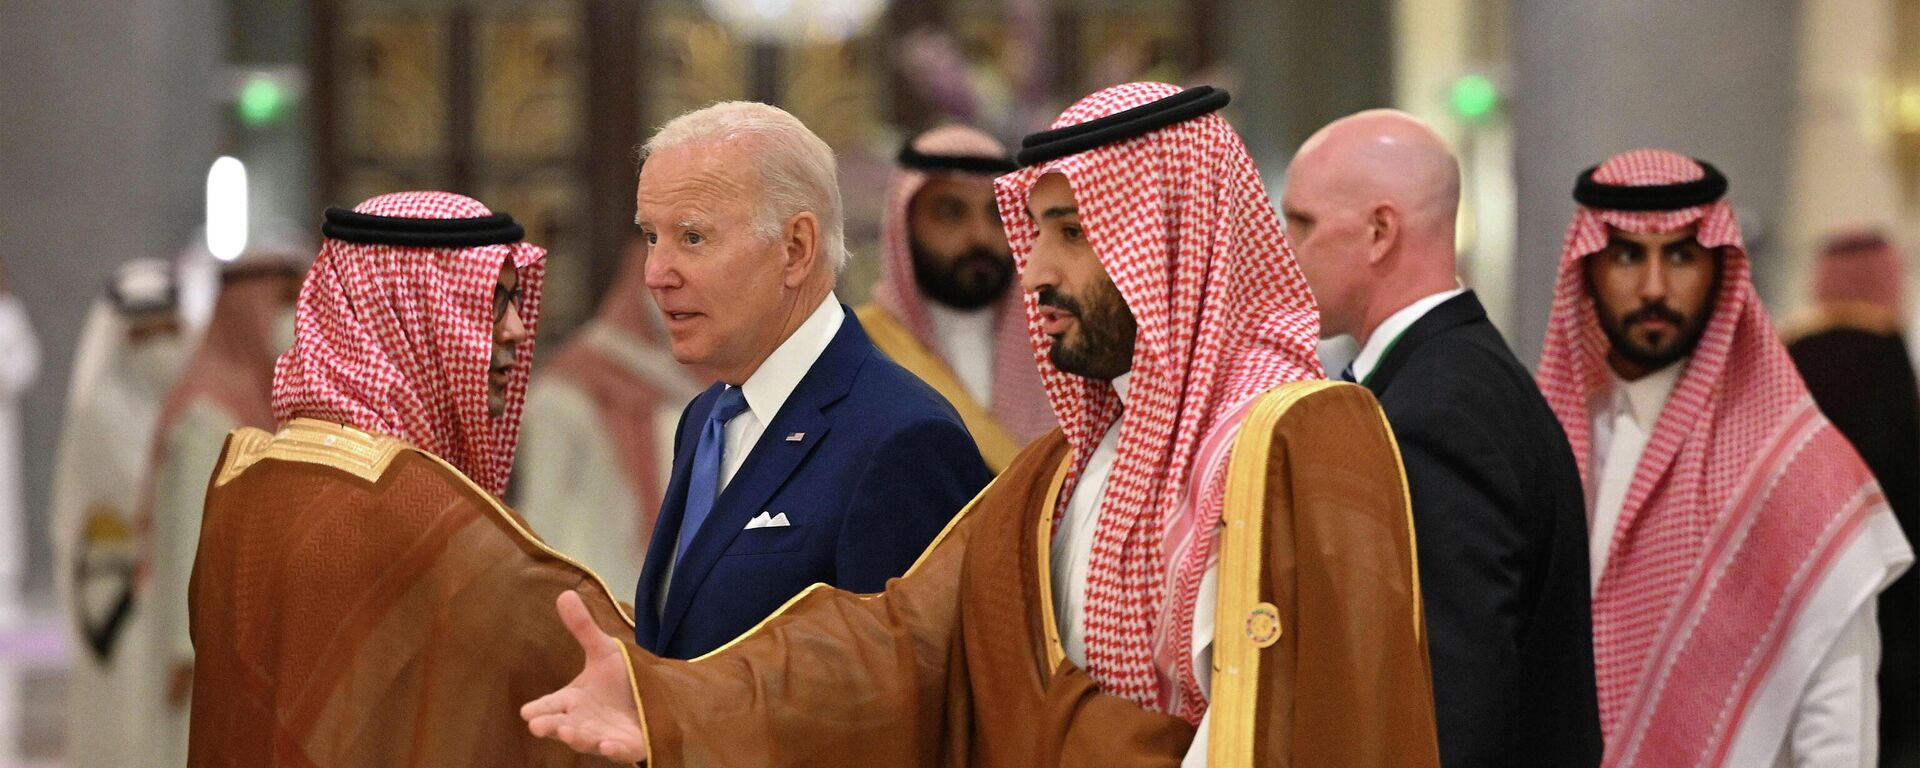 U.S. President Joe Biden, center left, and Saudi Crown Prince Mohammed bin Salman, center, arrive for the family photo during the GCC+3 (Gulf Cooperation Council) meeting at a hotel in Saudi Arabia's Red Sea coastal city of Jeddah Saturday, July 16, 2022 - Sputnik International, 1920, 16.07.2022